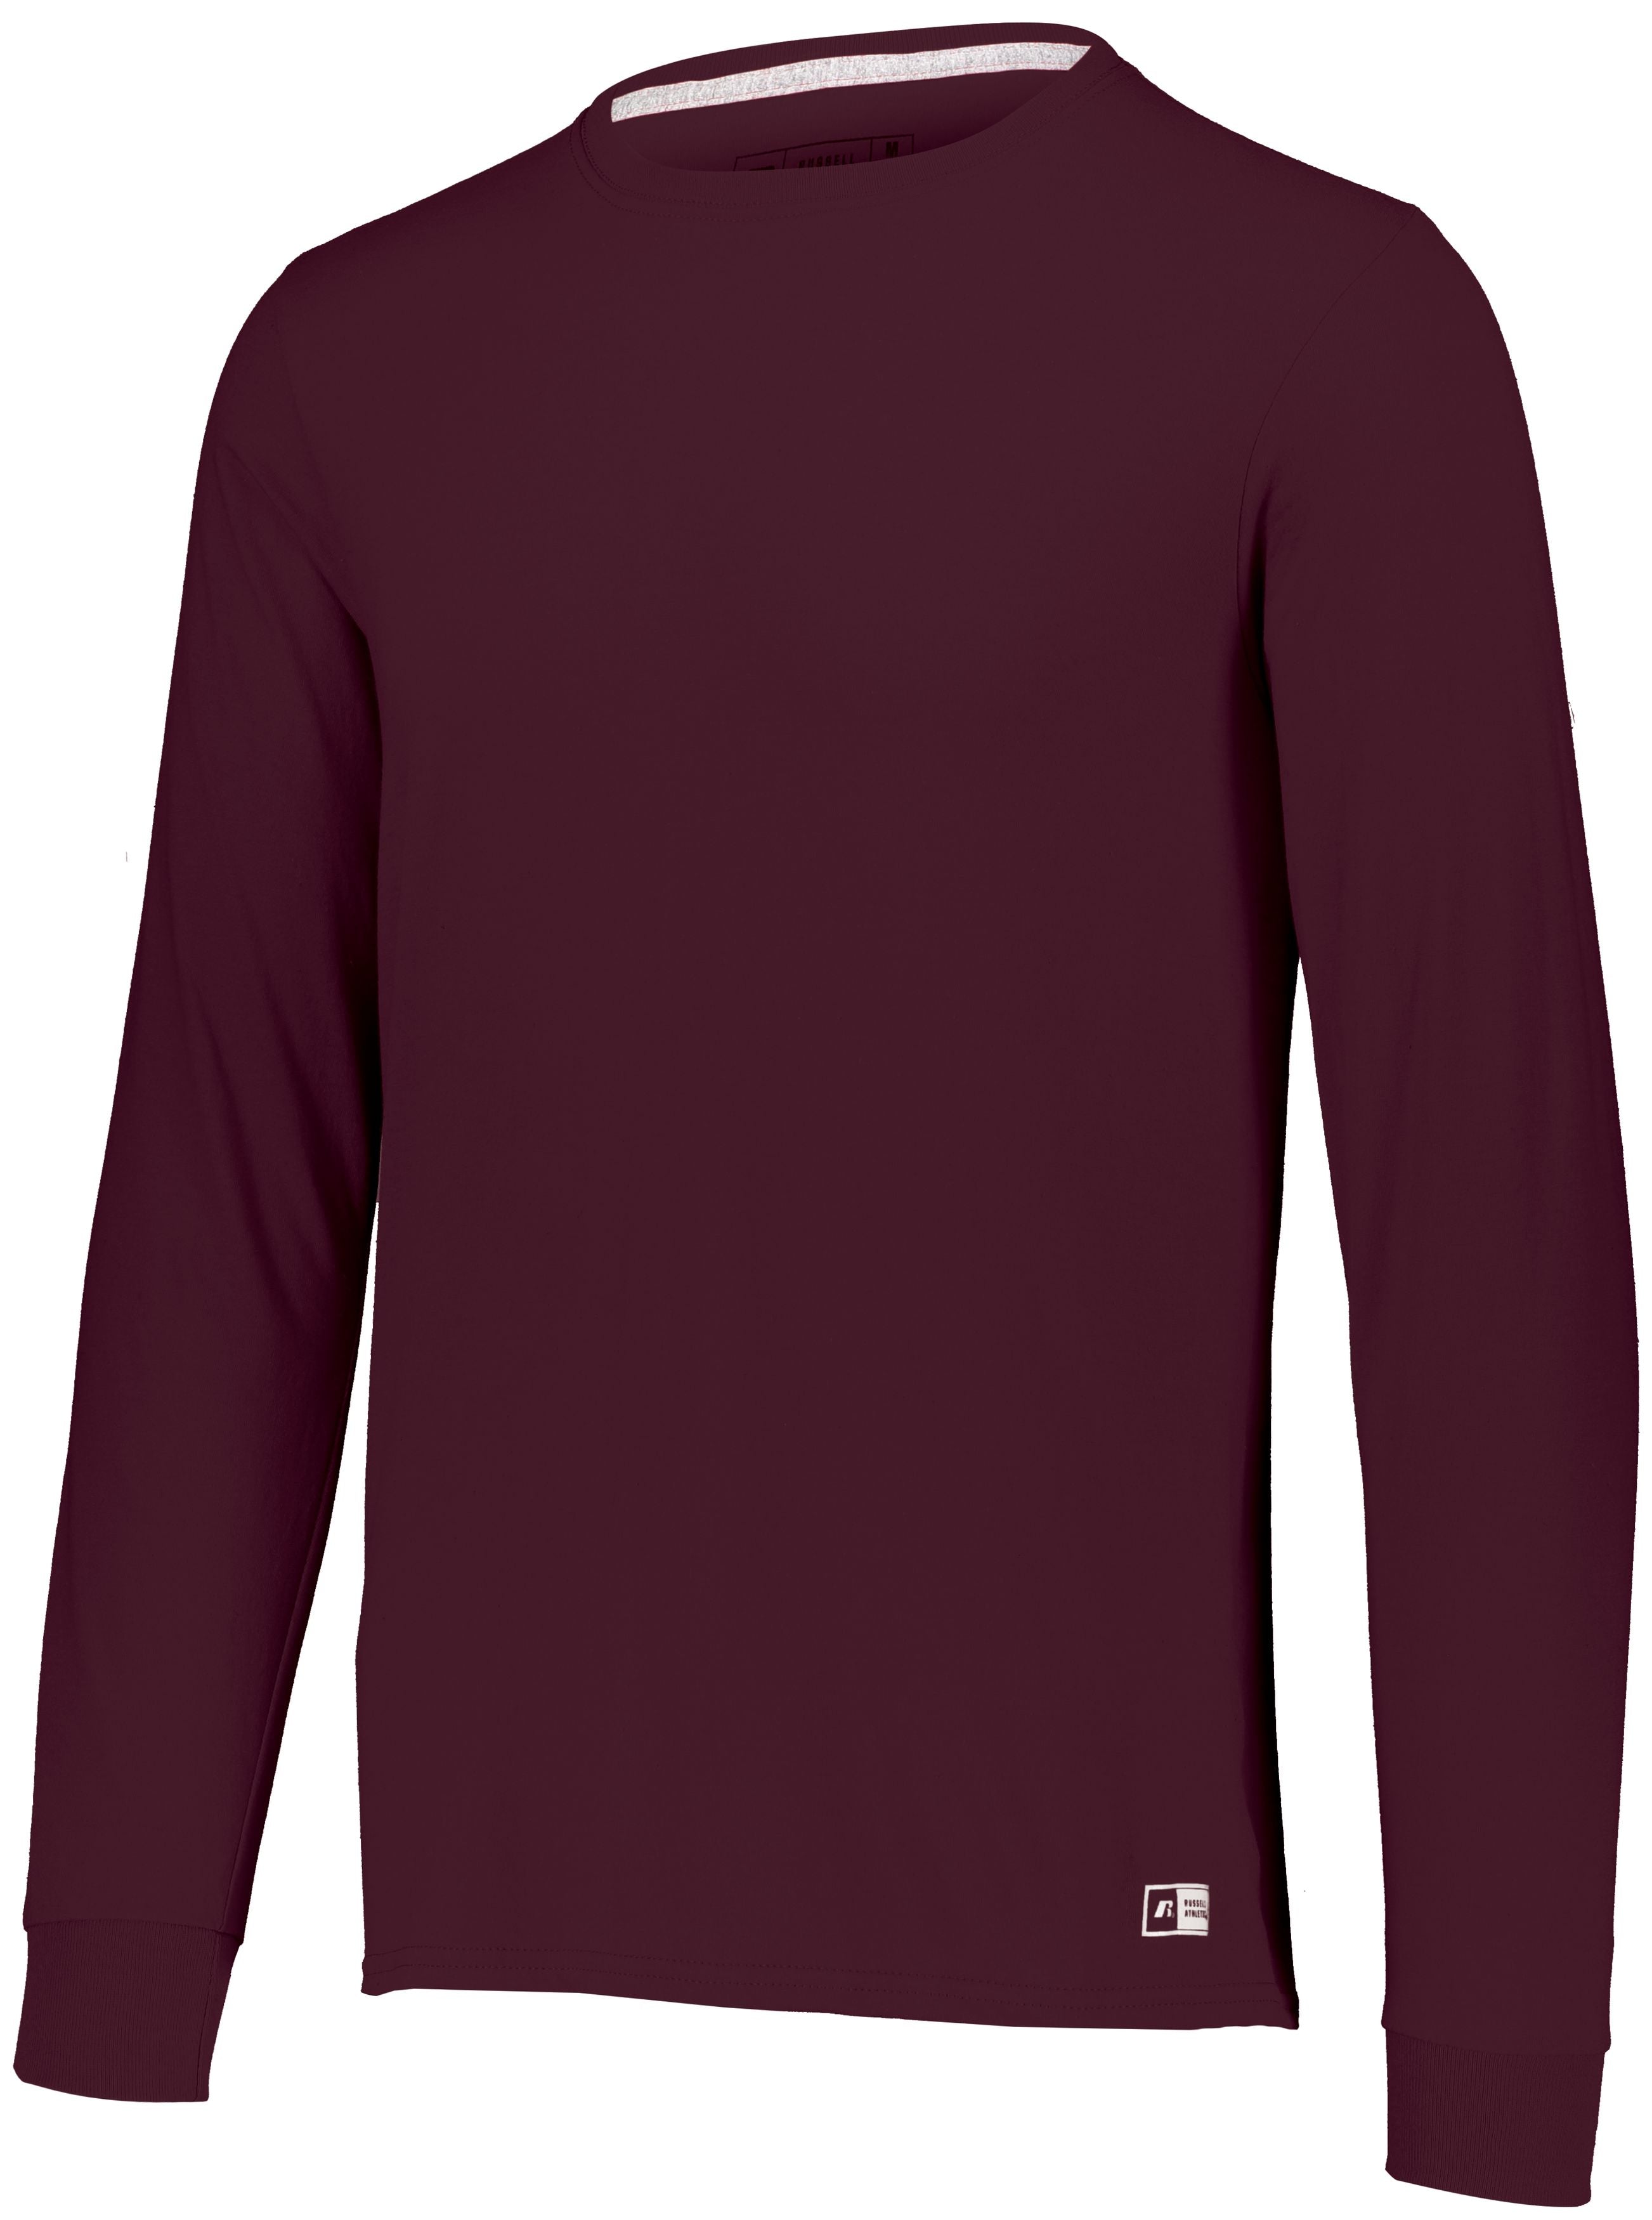 Russell Athletic Essential Long Sleeve Tee in Maroon  -Part of the Adult, Adult-Tee-Shirt, T-Shirts, Russell-Athletic-Products, Shirts product lines at KanaleyCreations.com